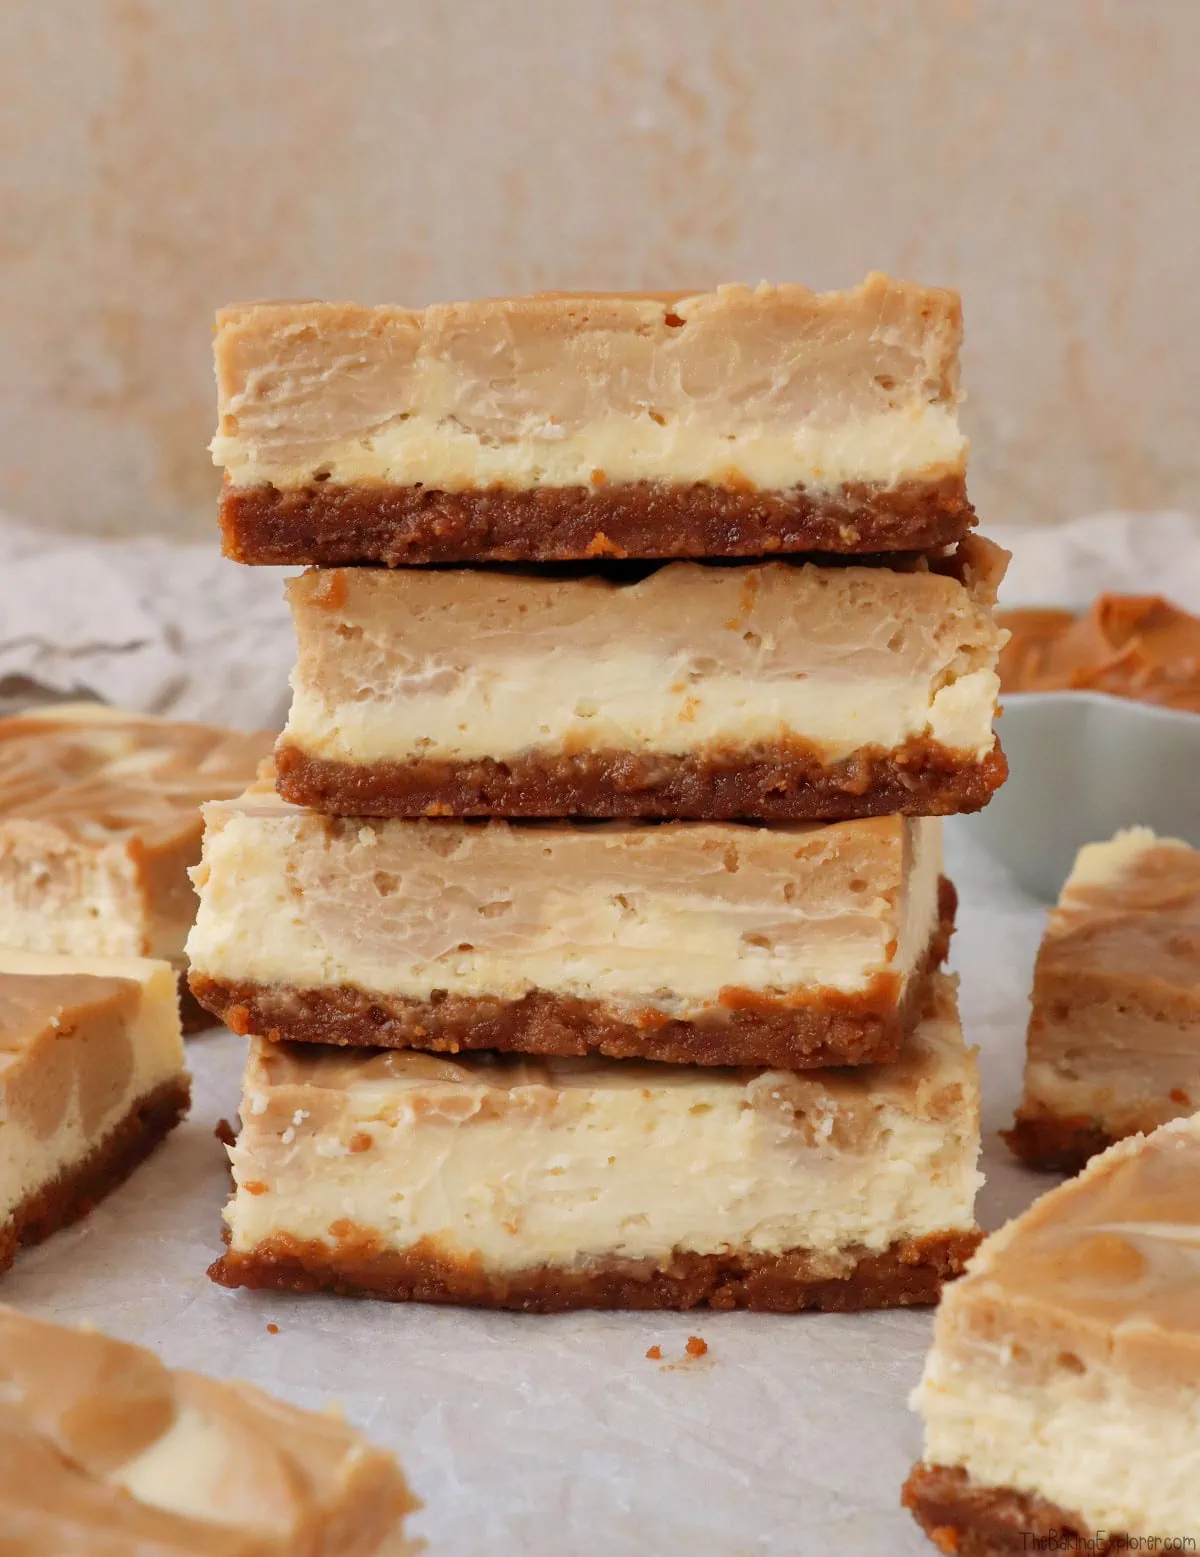 Biscoff Cheesecake Squares